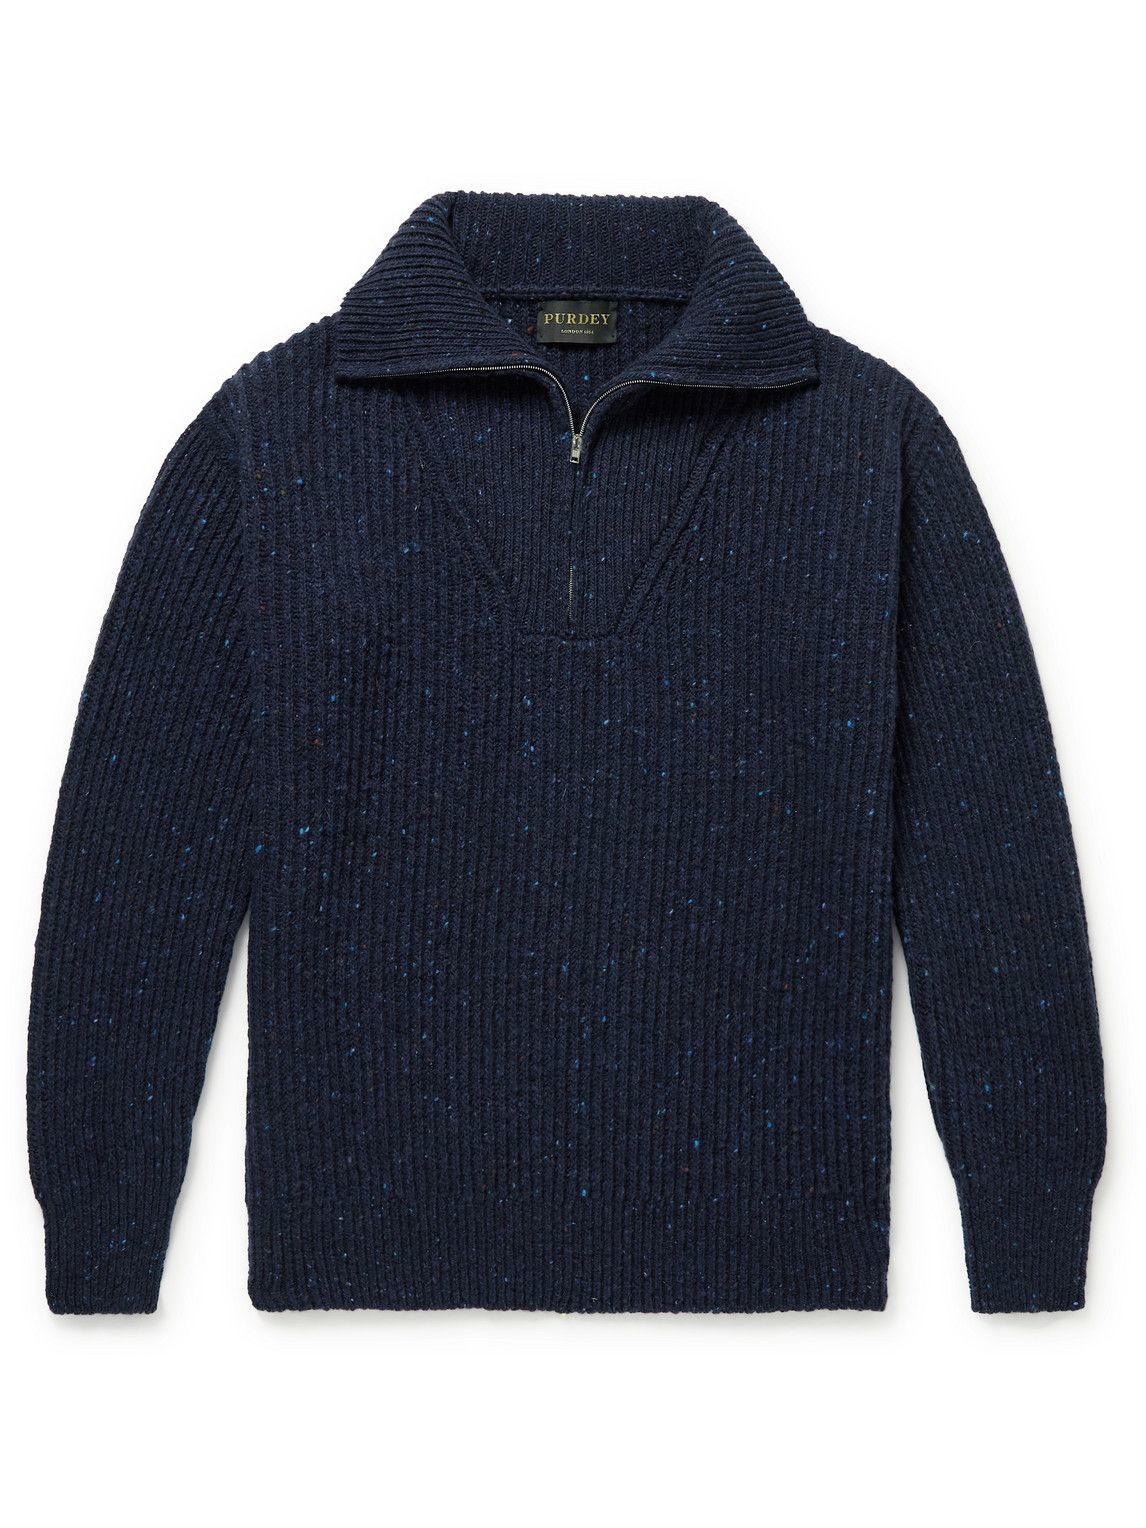 Mens Clothing Sweaters and knitwear Zipped sweaters Blue James Purdey & Sons Quarter-zip Sweater in Navy for Men 